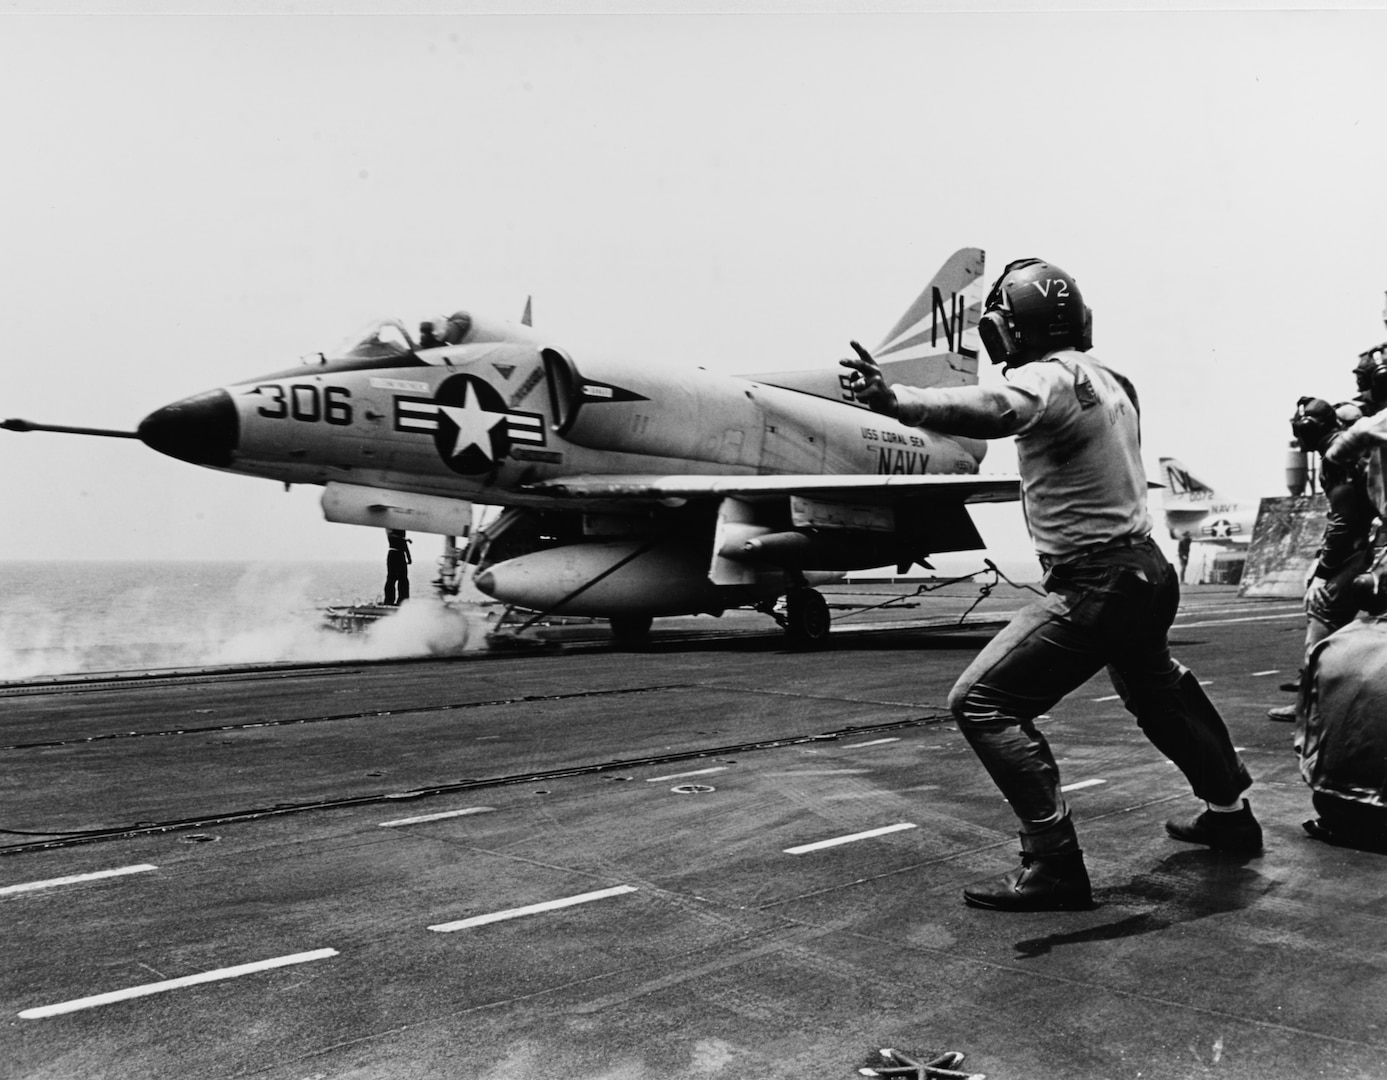 Catapult officer signals launch as A-4 Skyhawk starts down flight deck of USS Coral Sea during operations in South China Sea, March 24, 1965 (U.S. Navy/James F. Falk)